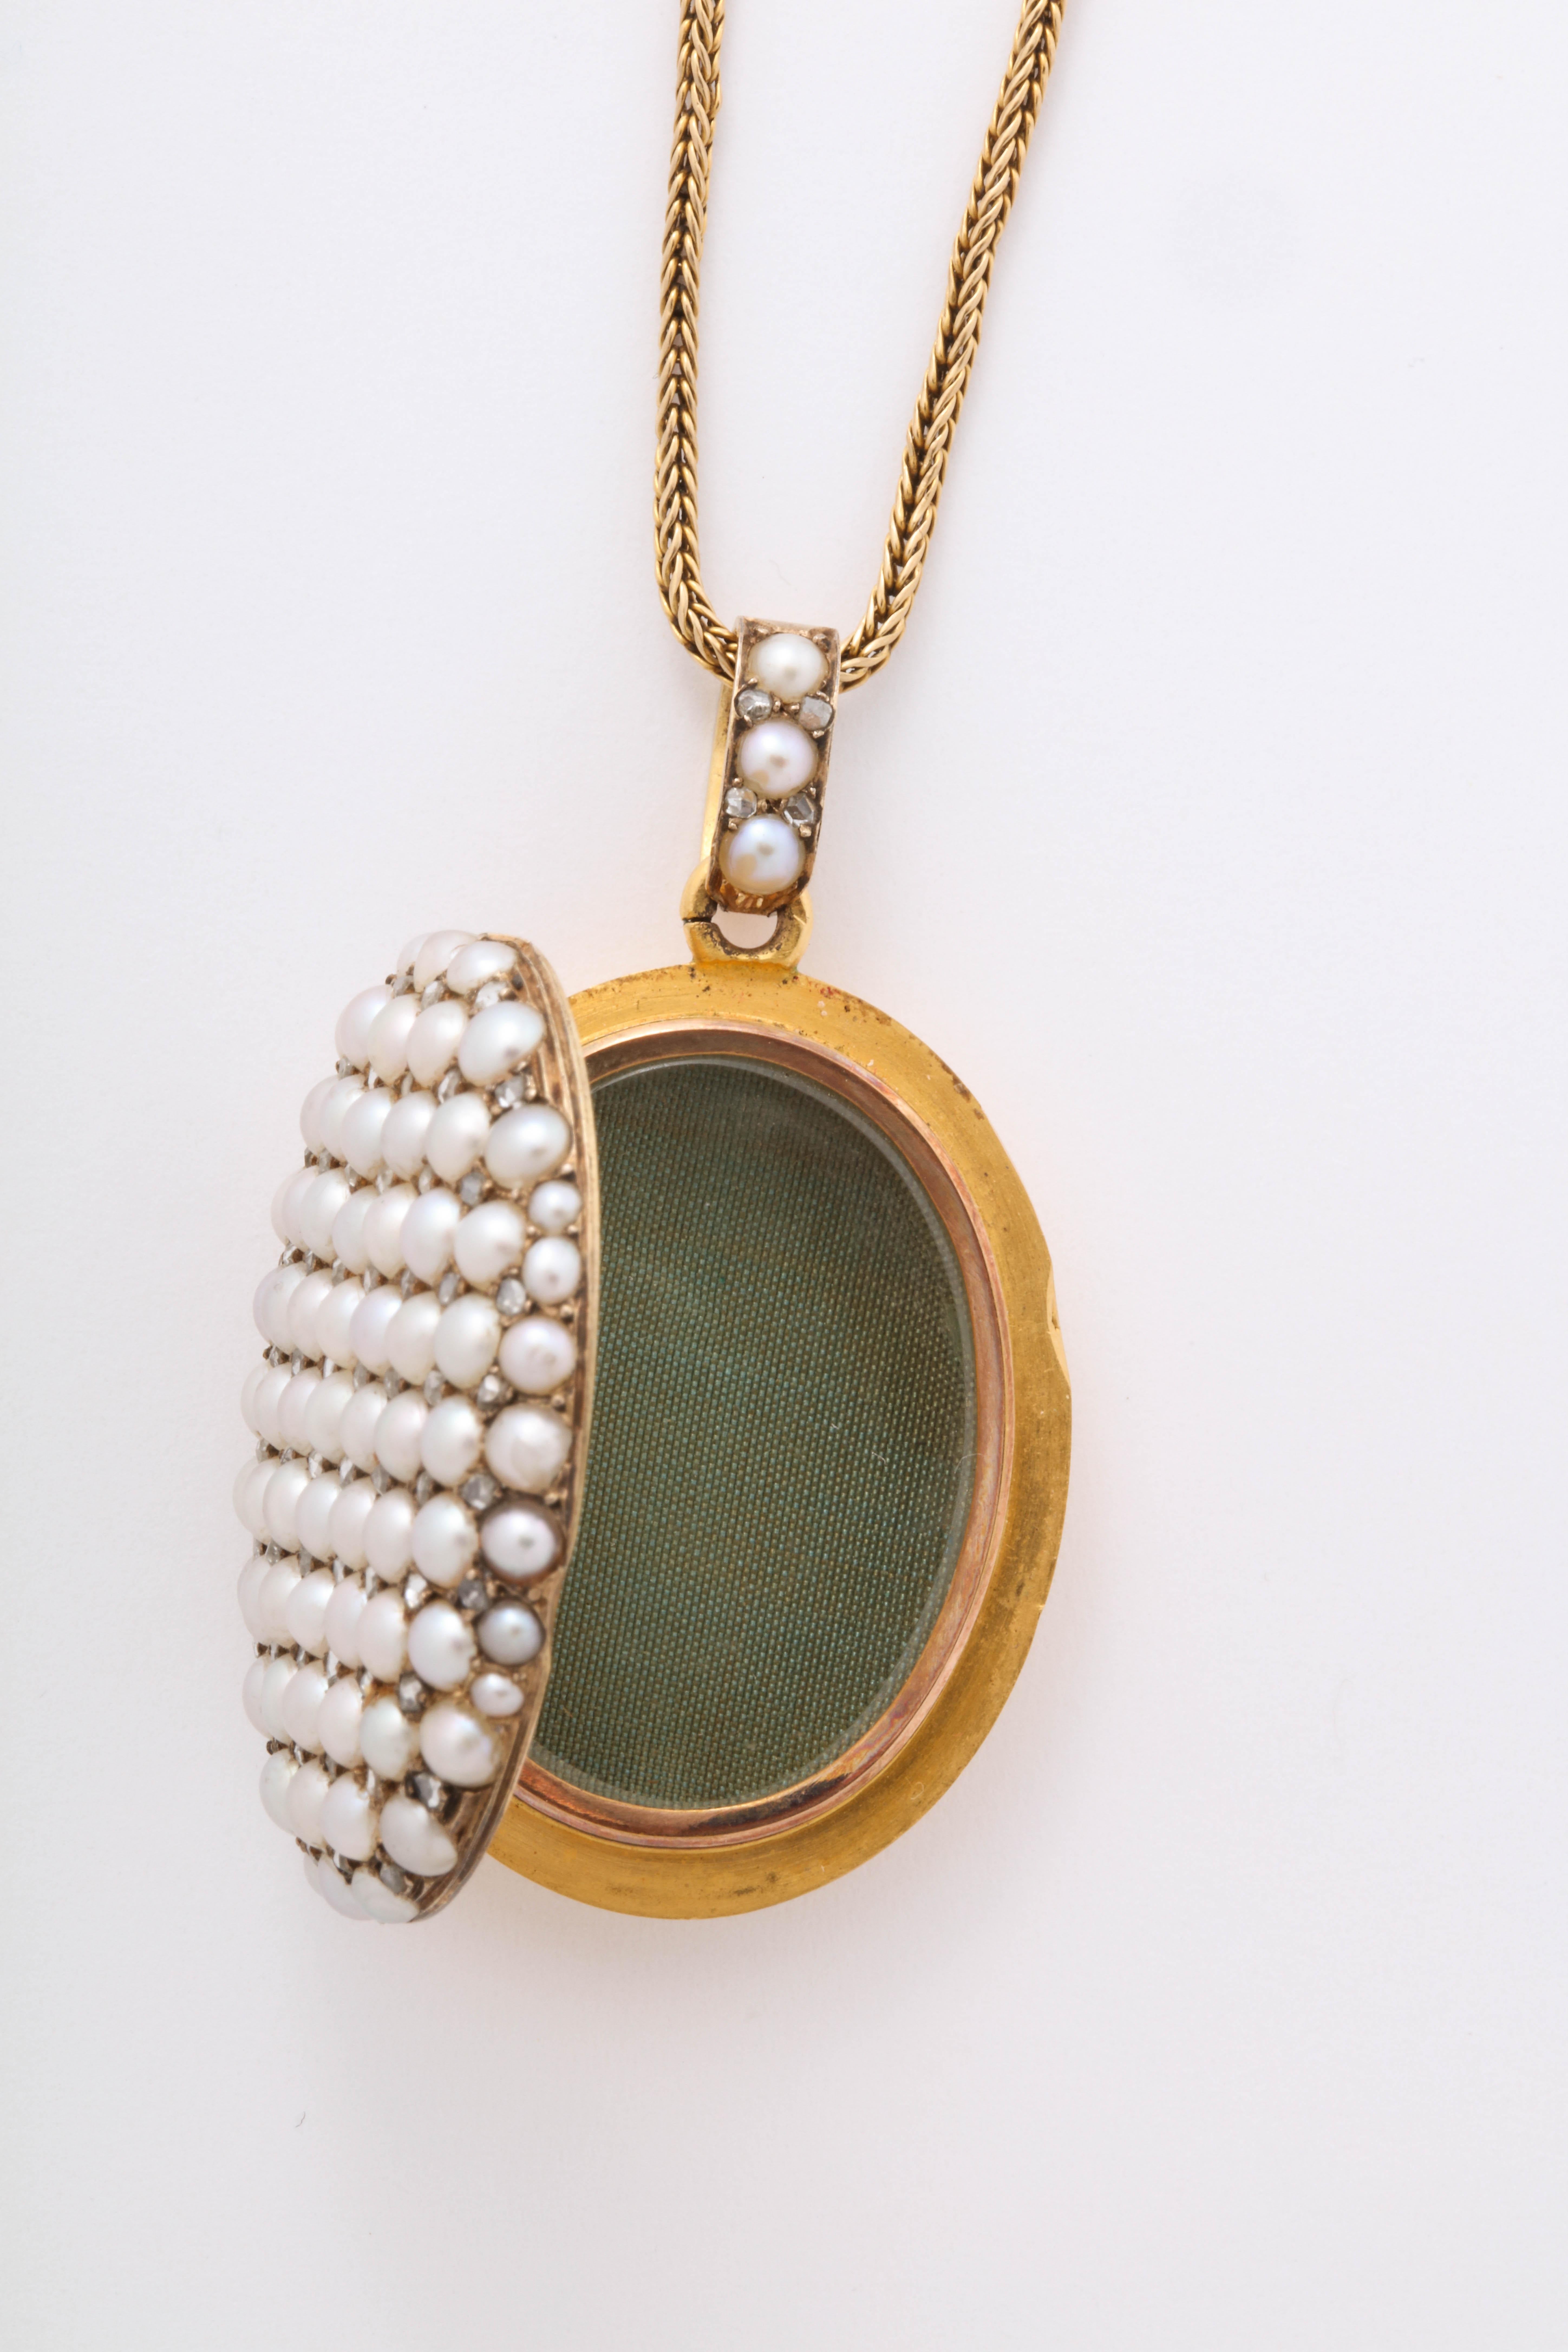 Victorian Seed Pearl and Diamond Locket on Chain 1